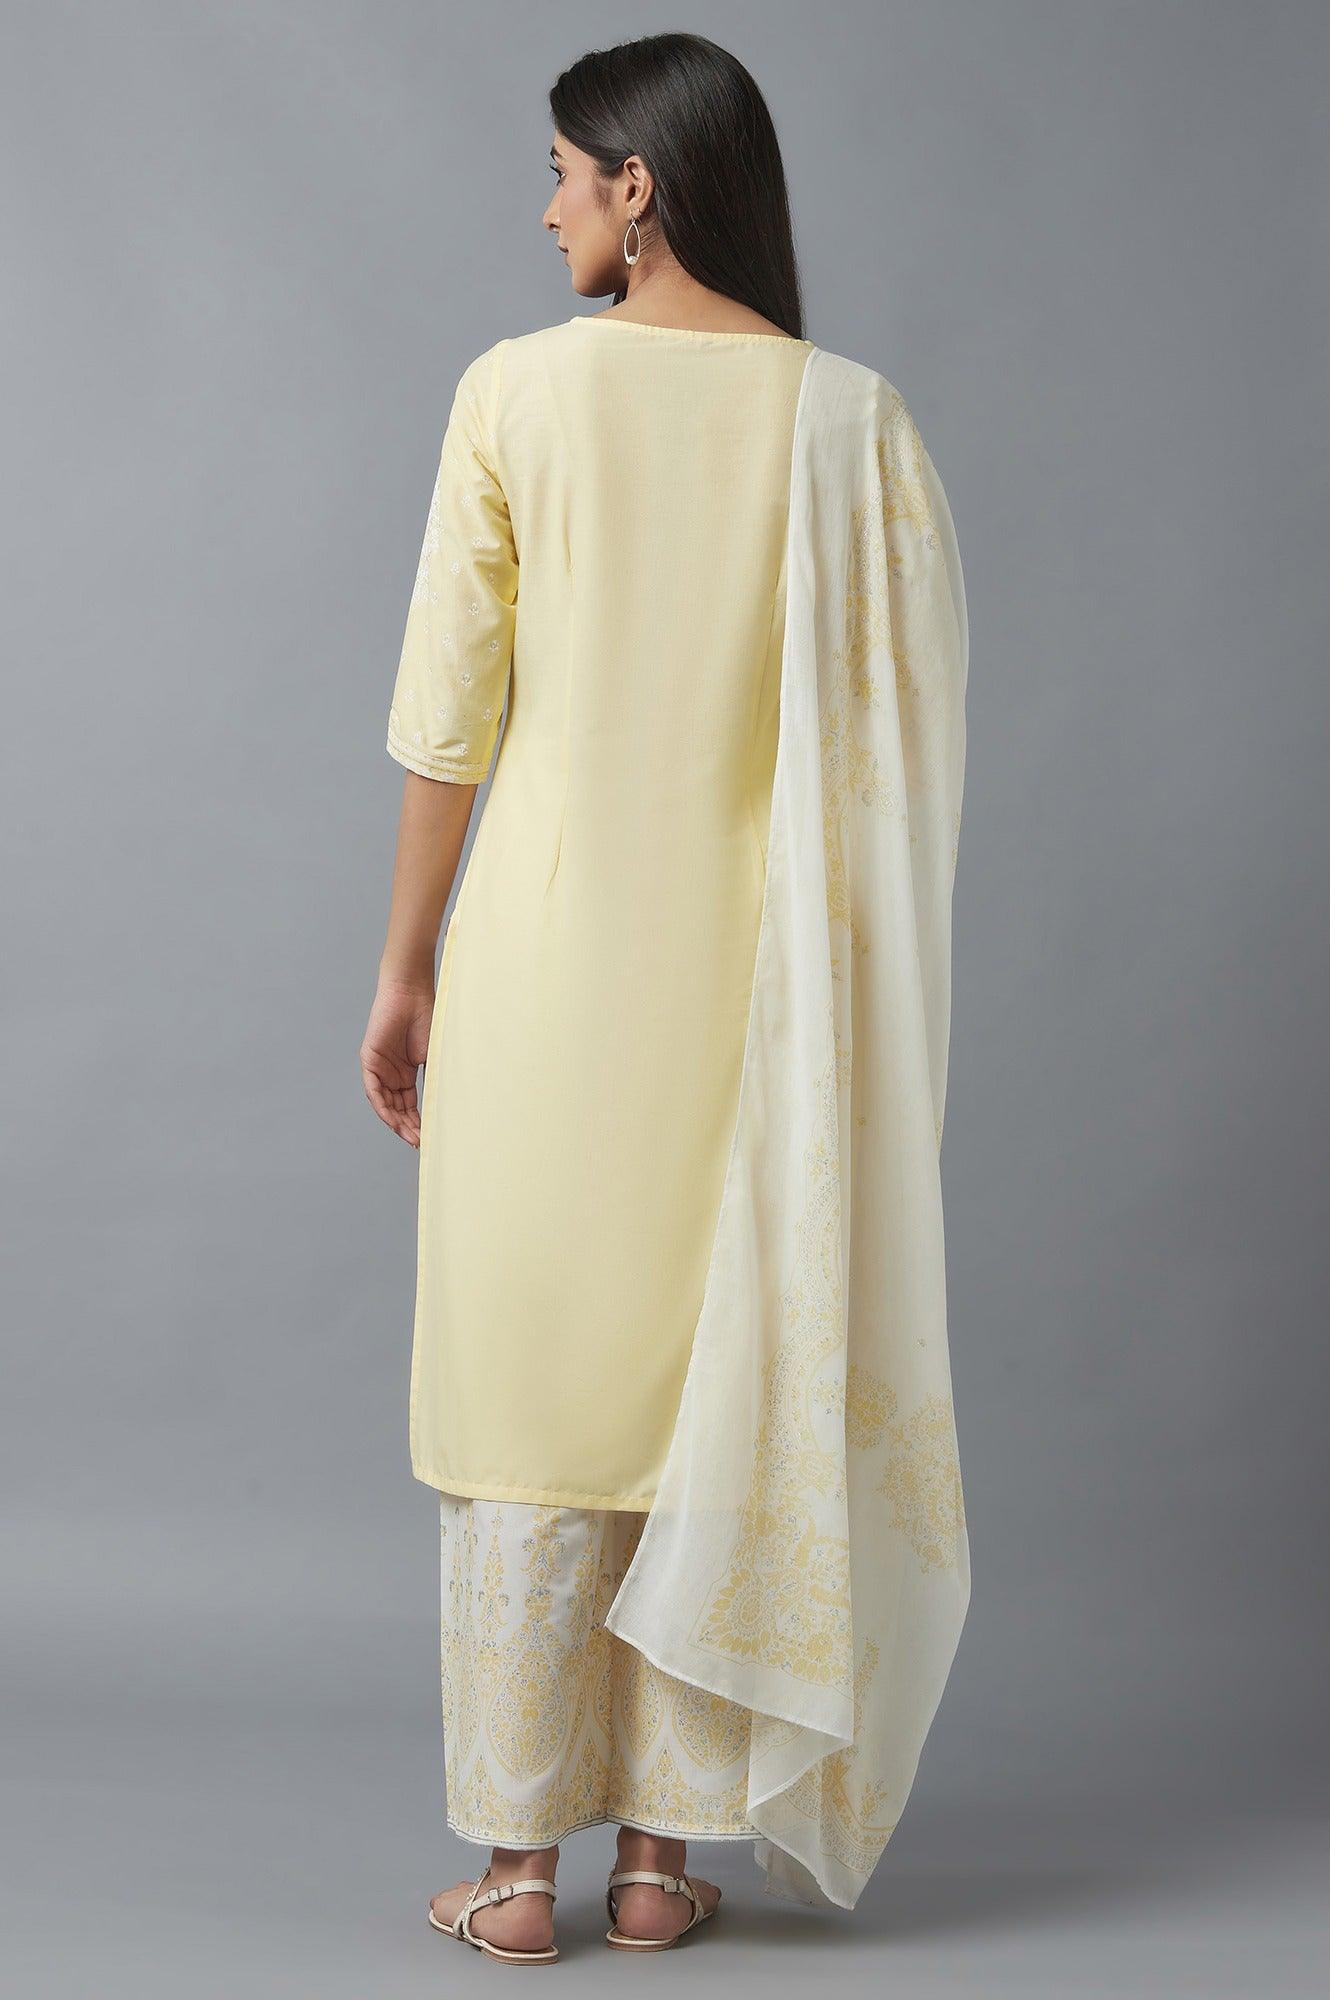 Yellow Embroidered kurta with Parallel Pants and Dupatta - wforwoman